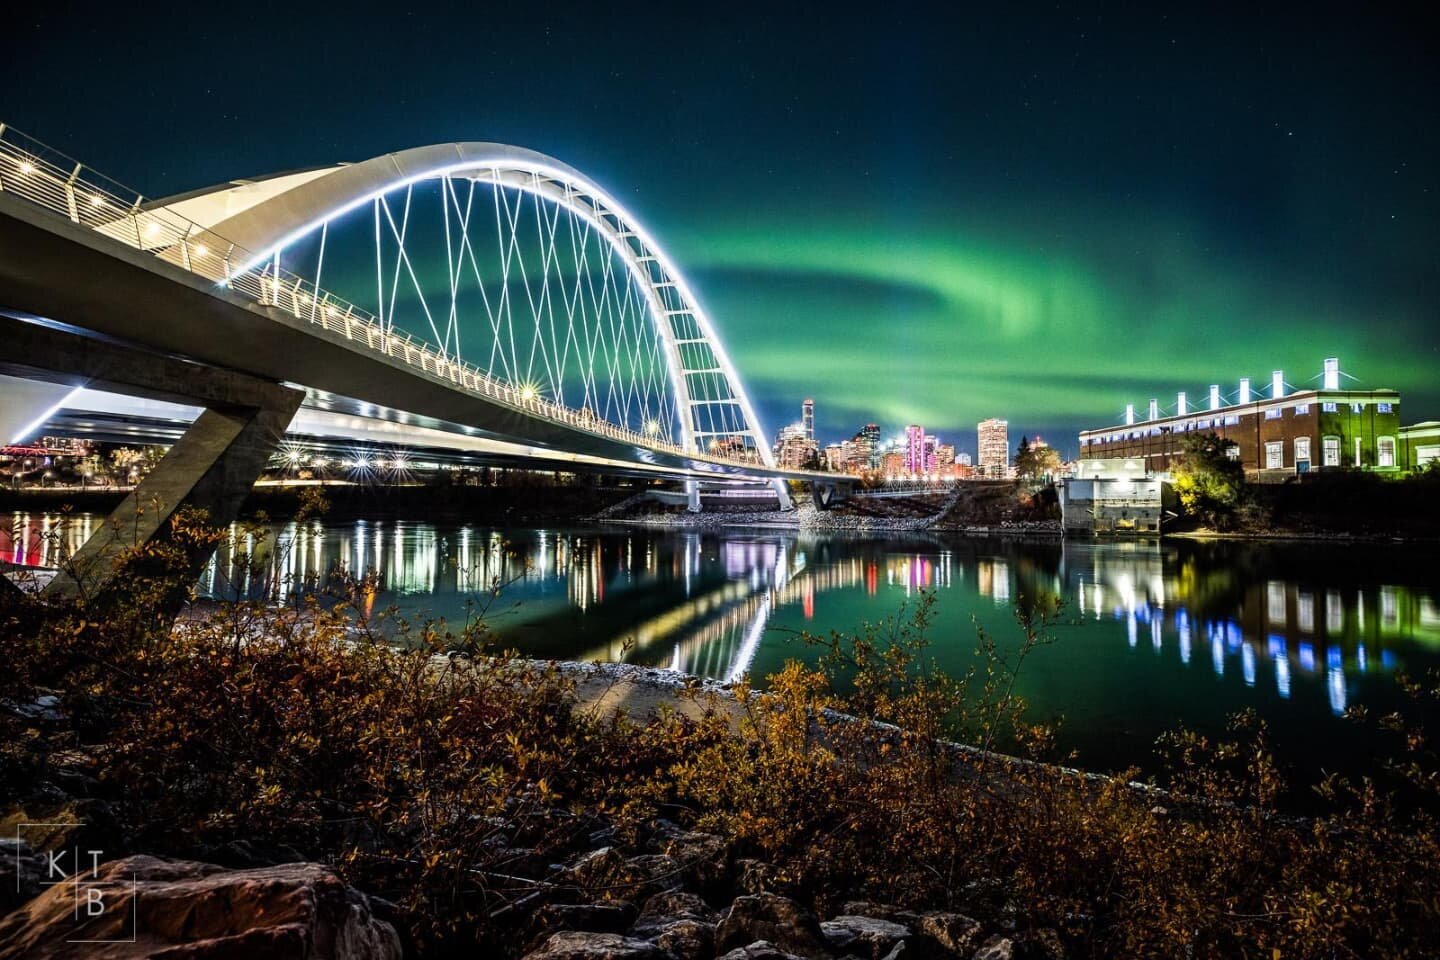 I've held off shooting the Walterdale Bridge because everyone else was shooting it. But last night I finally went out and took a shot from an angle I've been thinking of for about a year now.
.
.
.
.
.
.
.
.
#edmonton #yeg #yegdt #edmontonalberta #ed